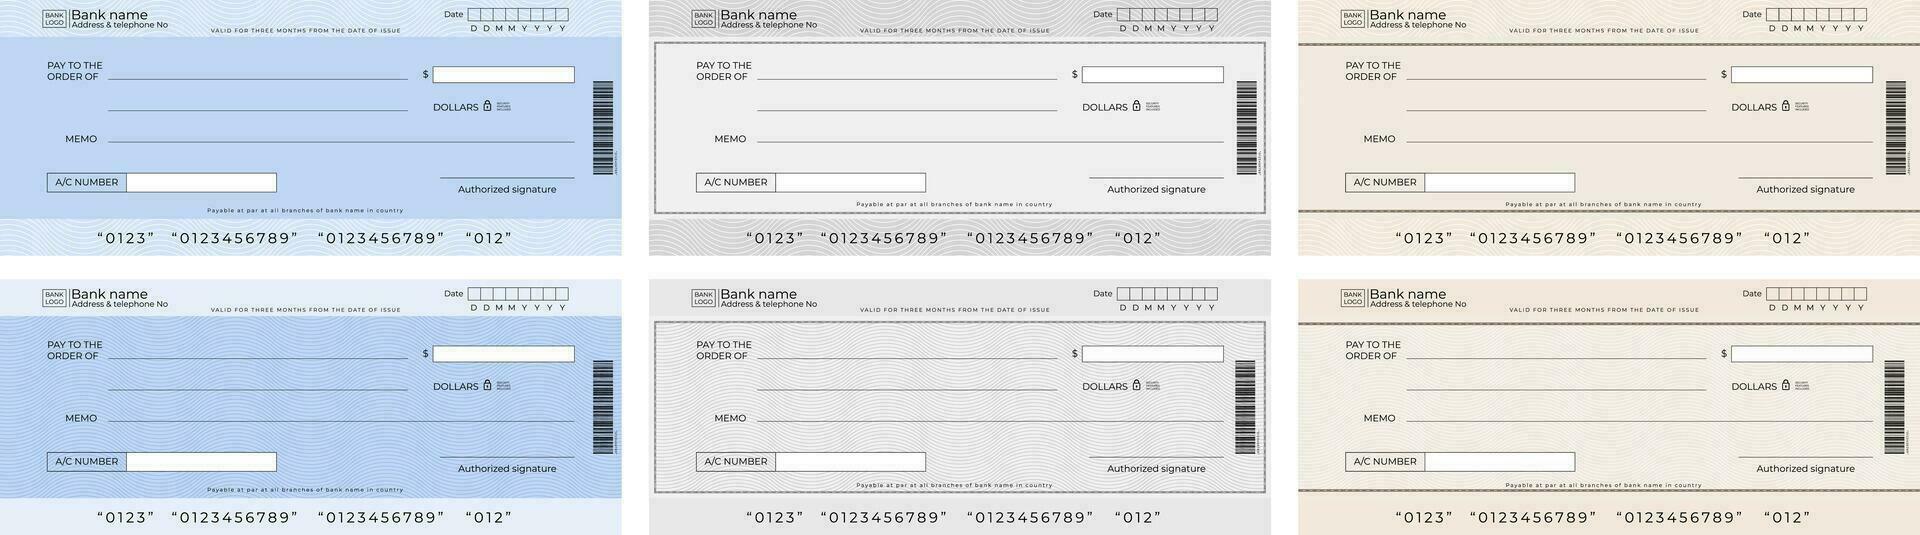 Blank bank cheque and checkbook cheque editable template design set vector